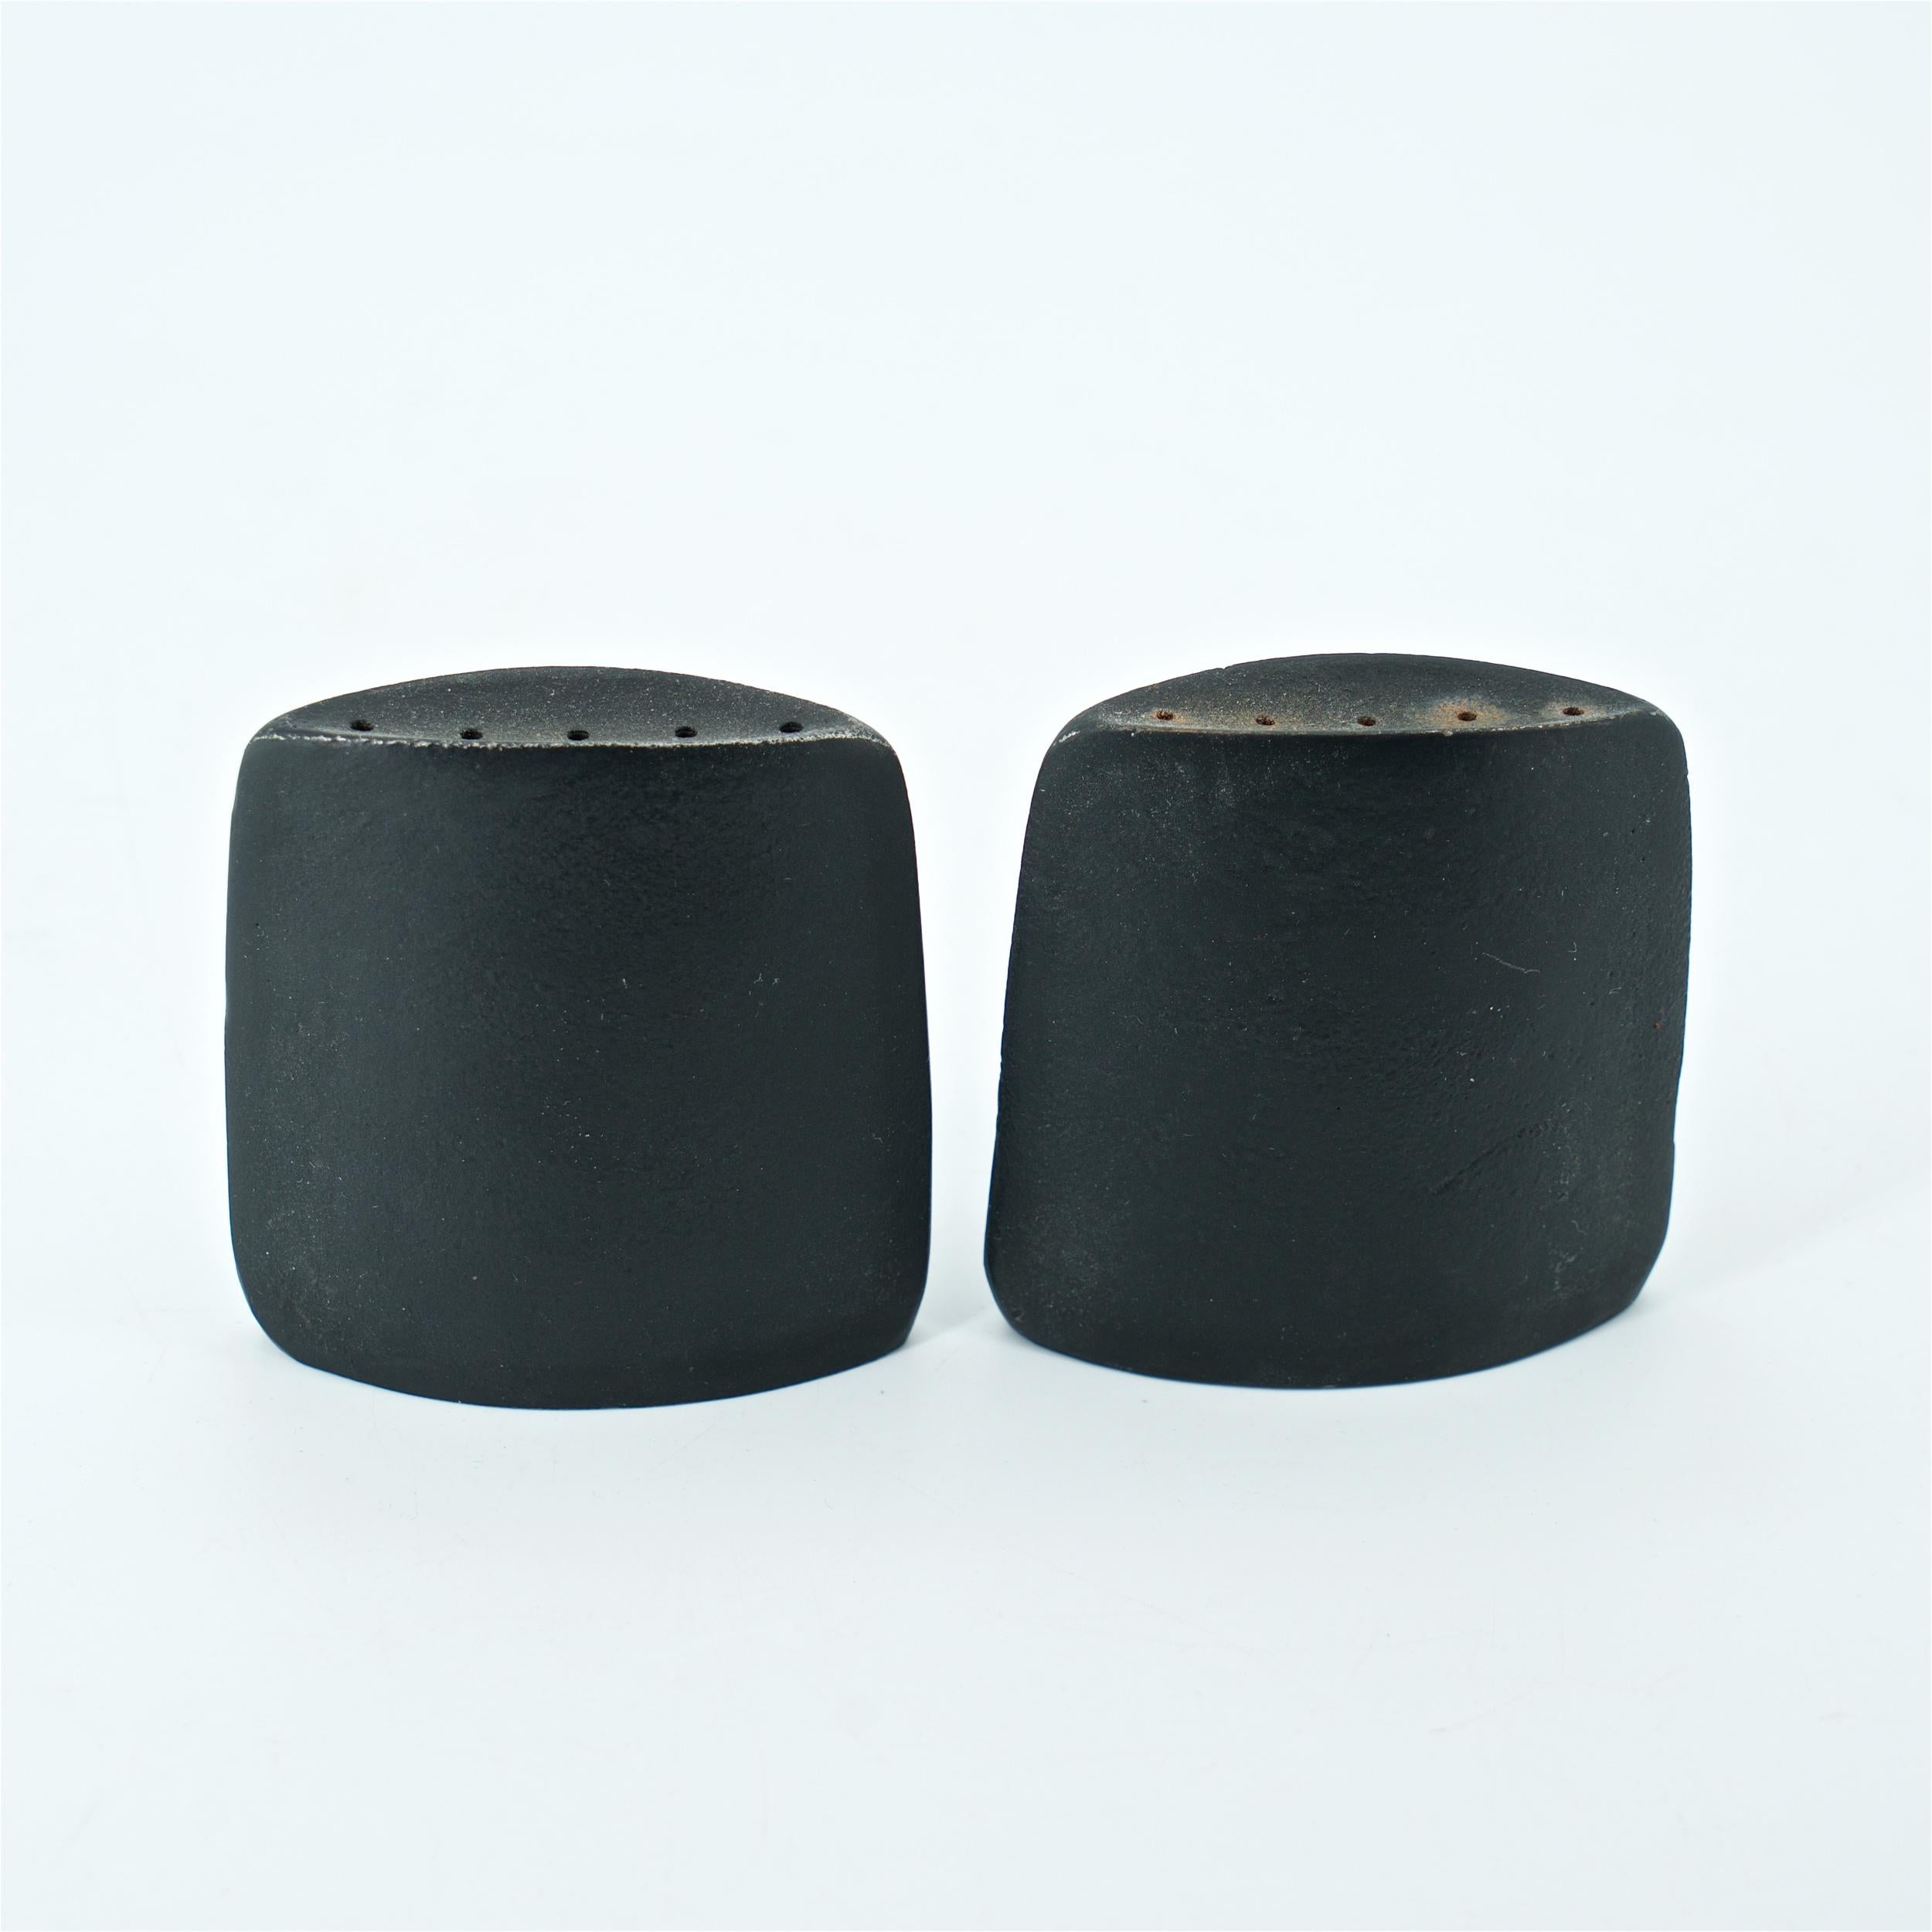 Cast metal salt and pepper shakers, will provide cork stoppers. Designer unknown. Ink stamped, Tokaido.
 